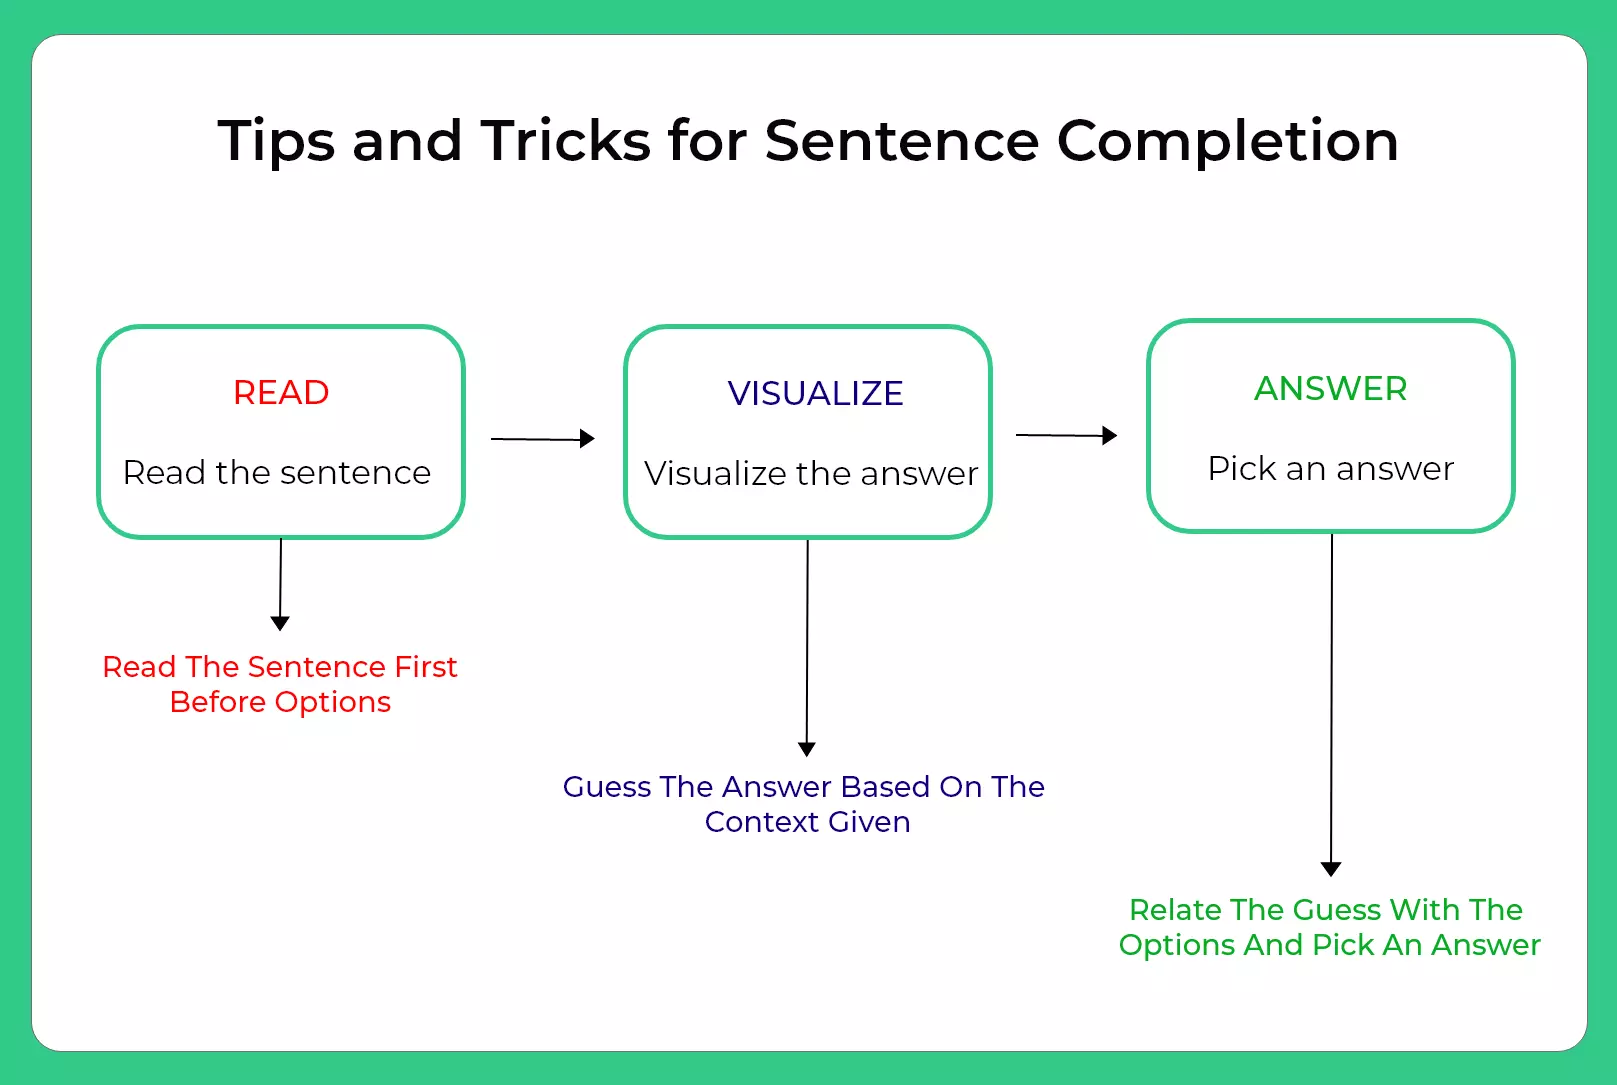 Tips and Tricks for Sentence Completion